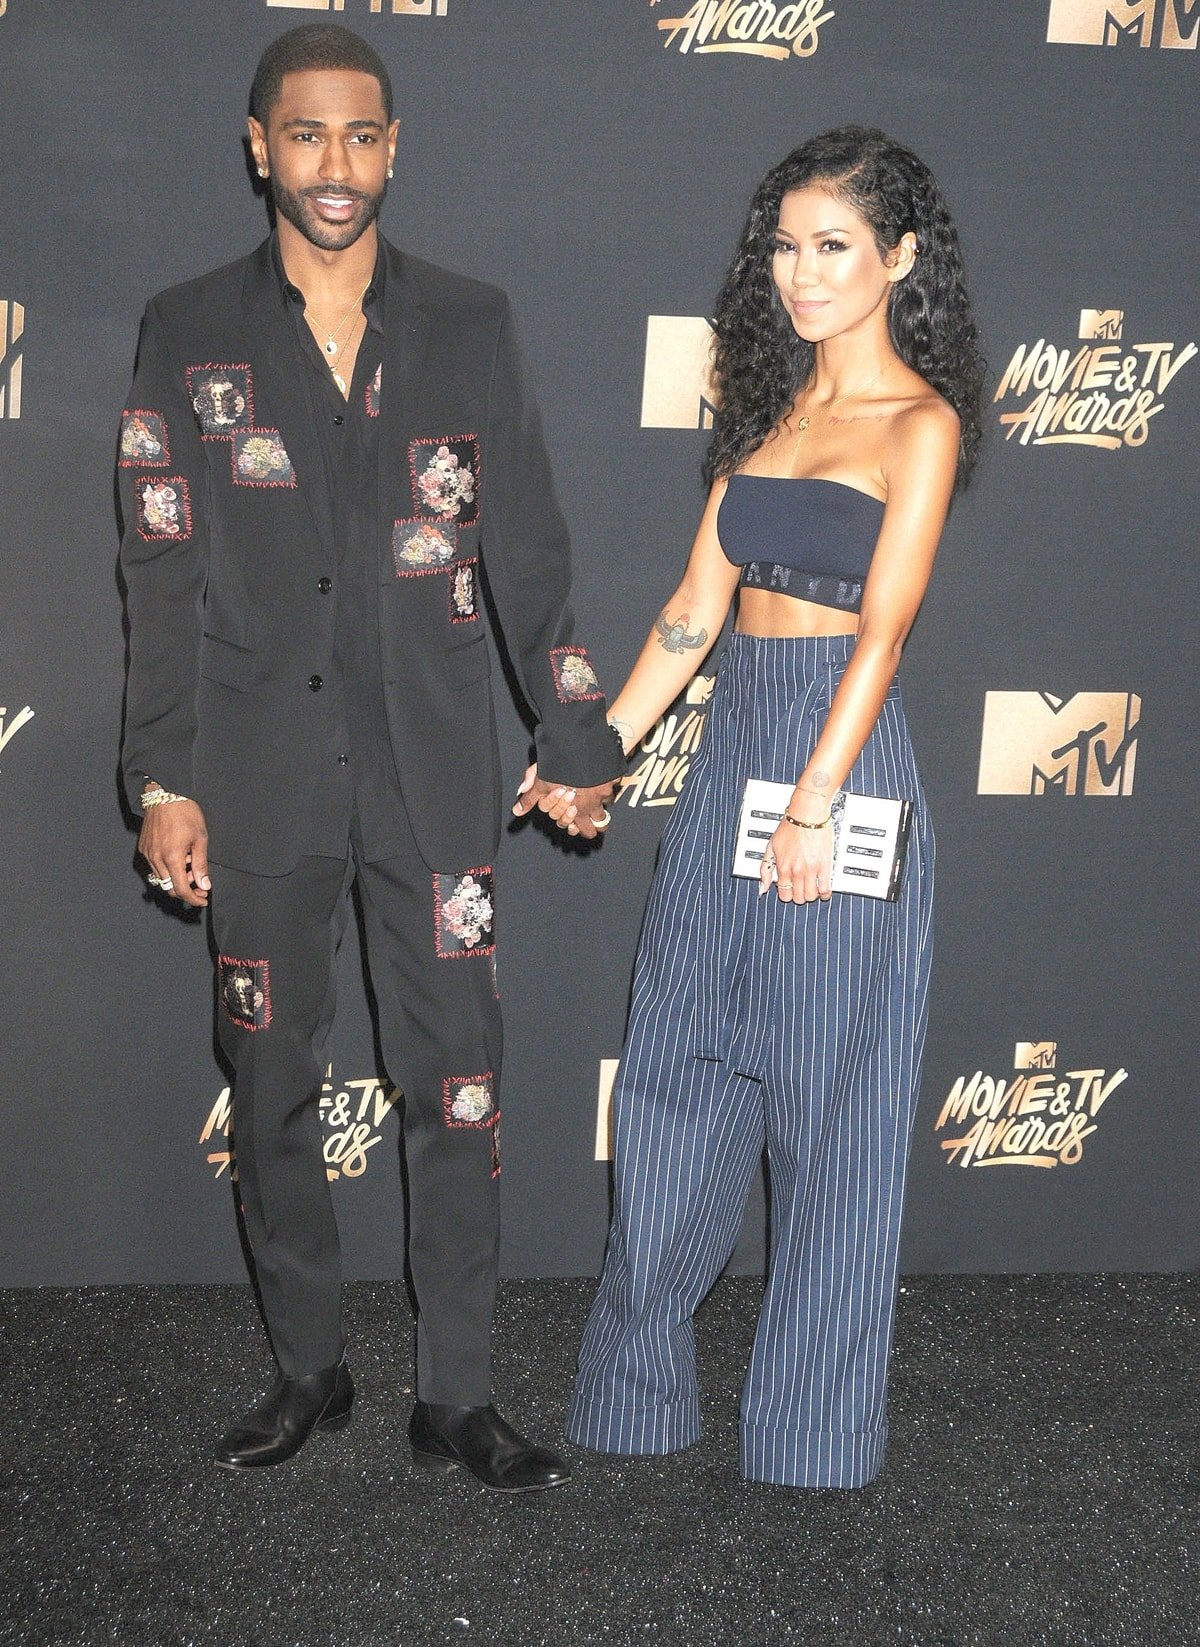 Jhene Aiko and Big Sean met at the studio of American hip hop and R&B record producer No I.D. in 2012